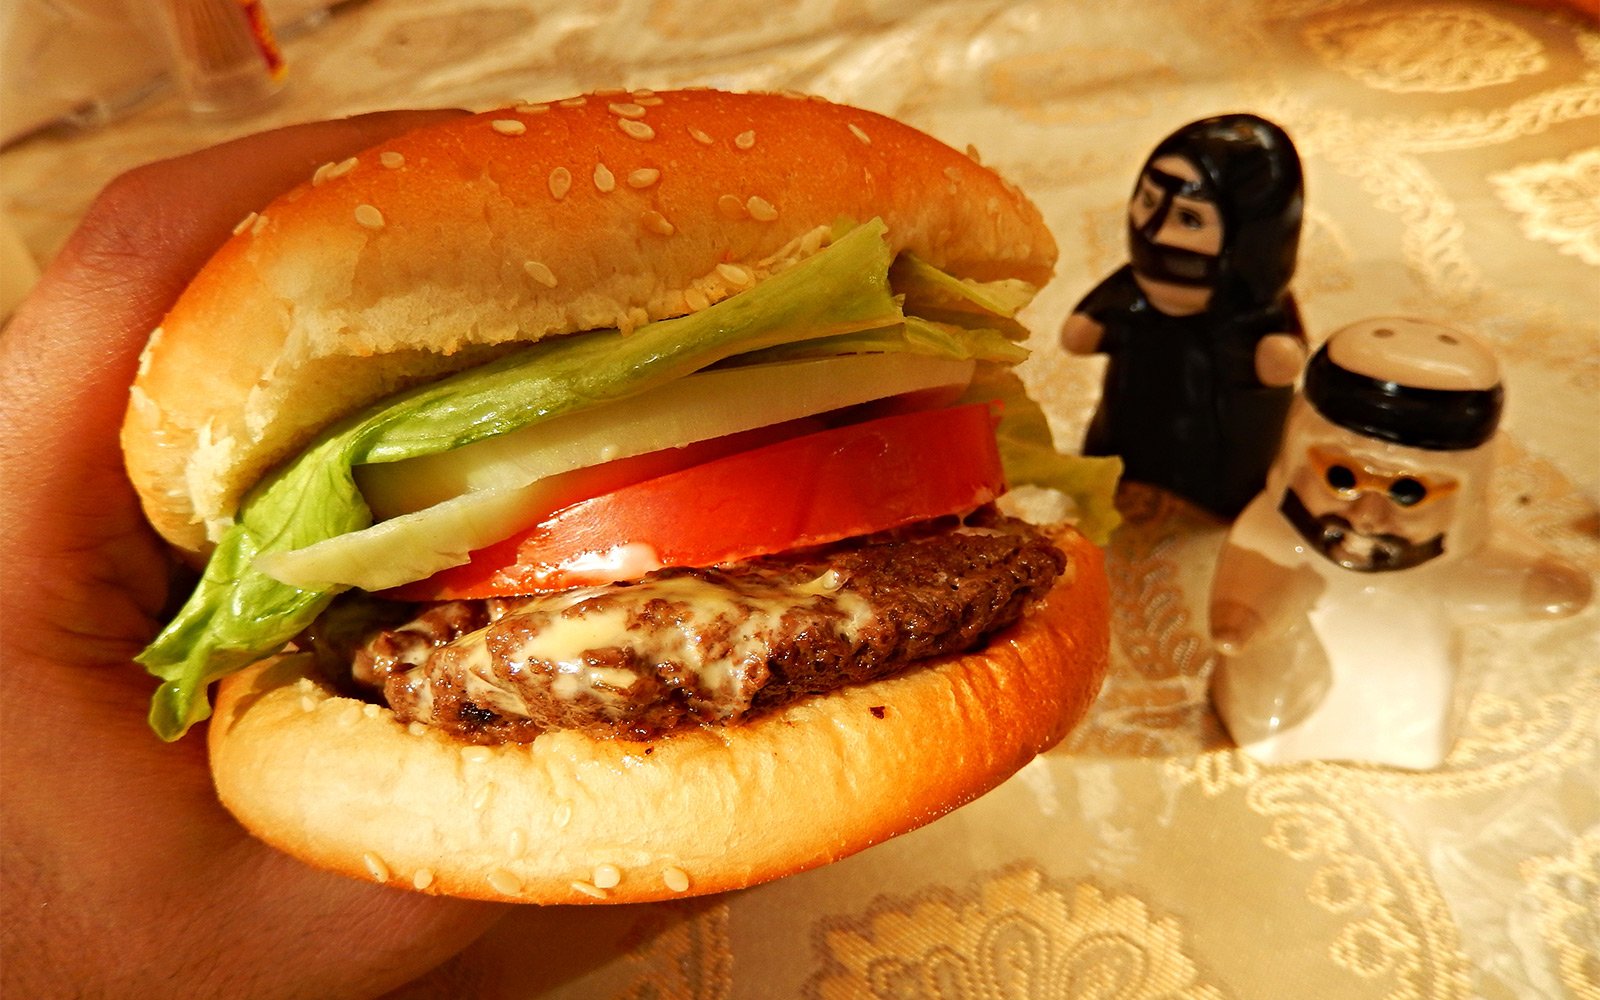 How to taste a camel burger – a sandwich with camel meat in Dubai